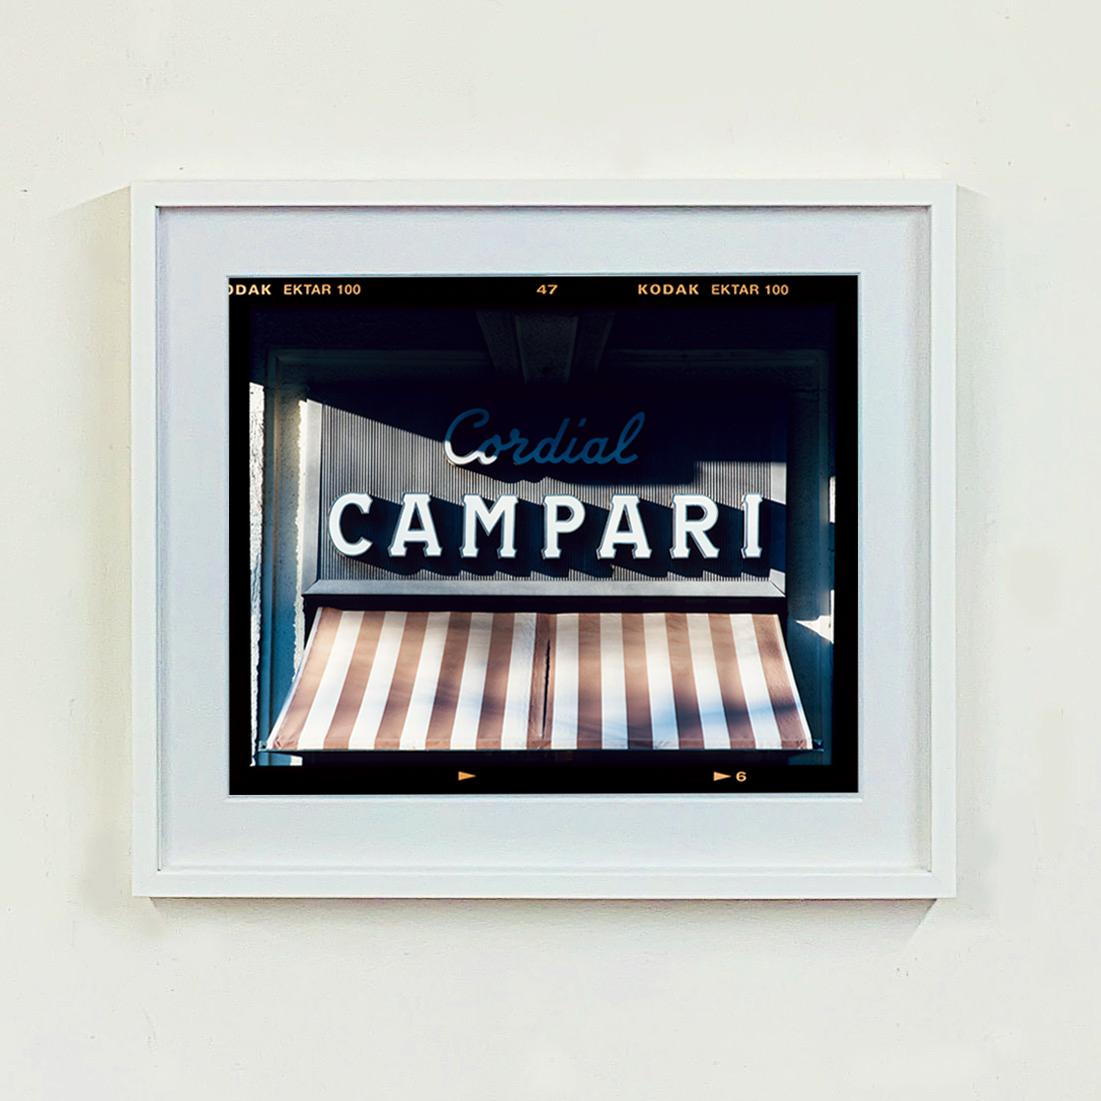 Cordial Campari, Milan - Architectural Color Photography - Black Print by Richard Heeps